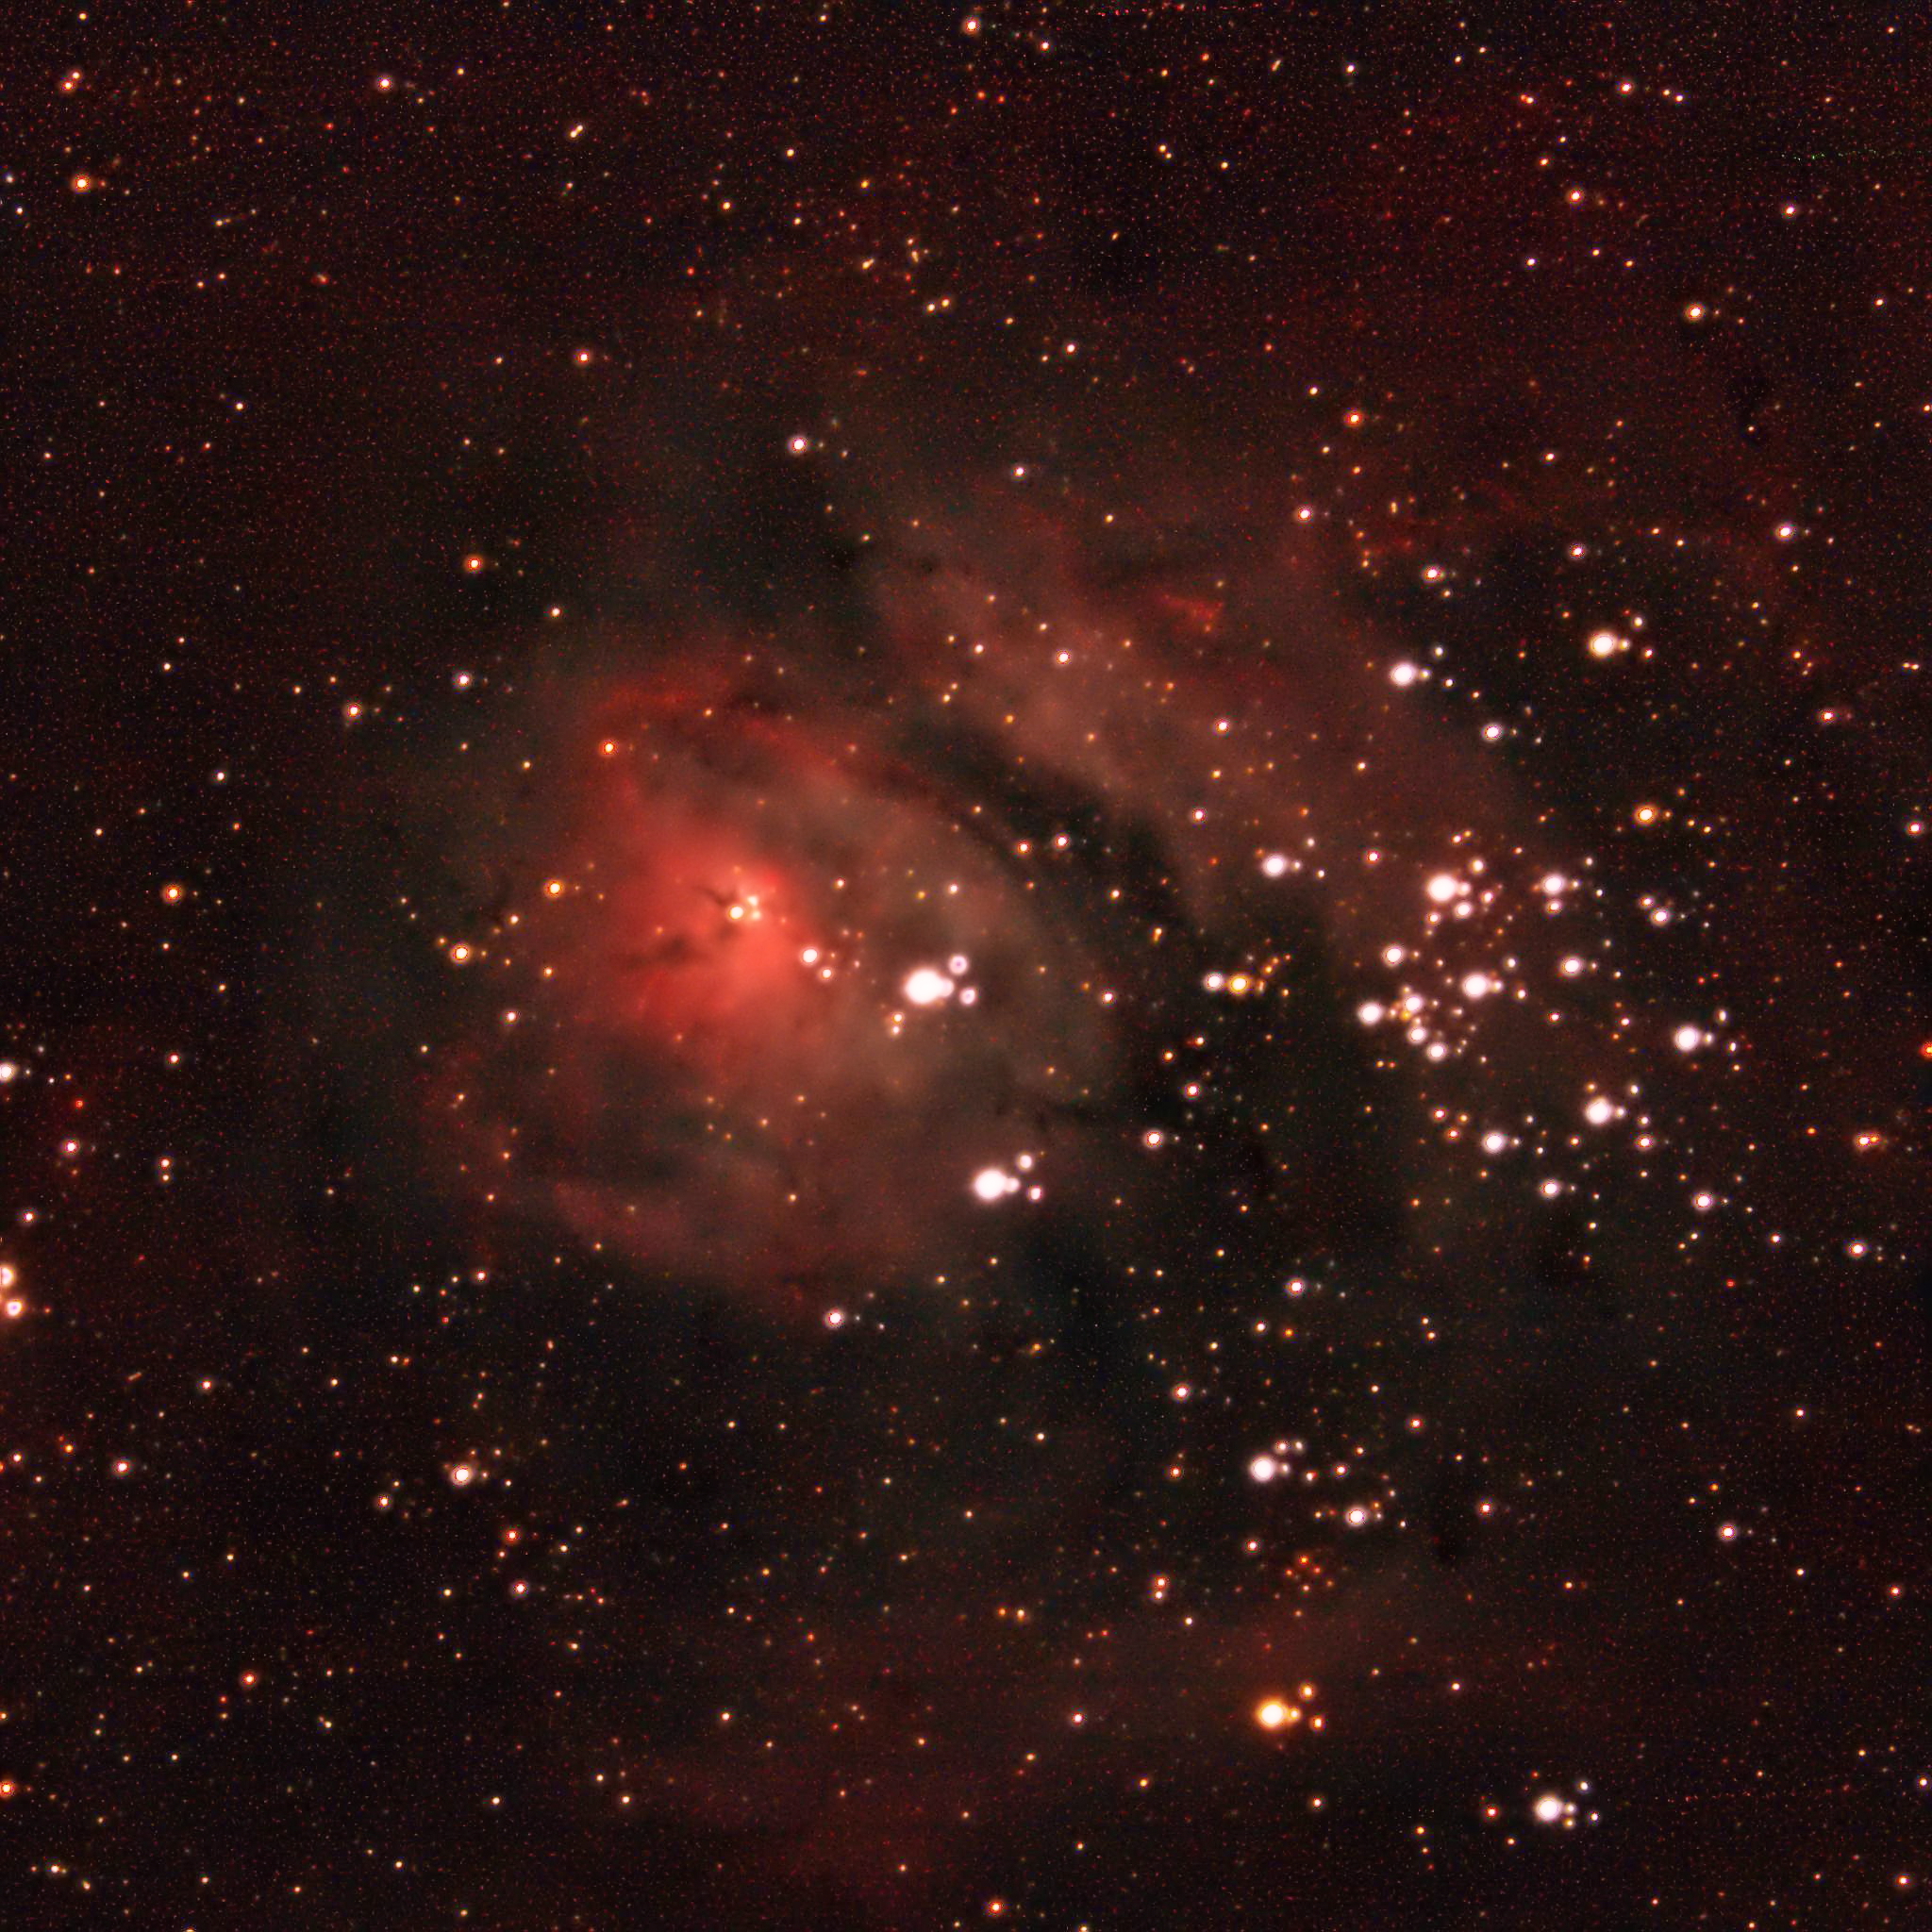 Image of the Month: The Lagoon Nebula